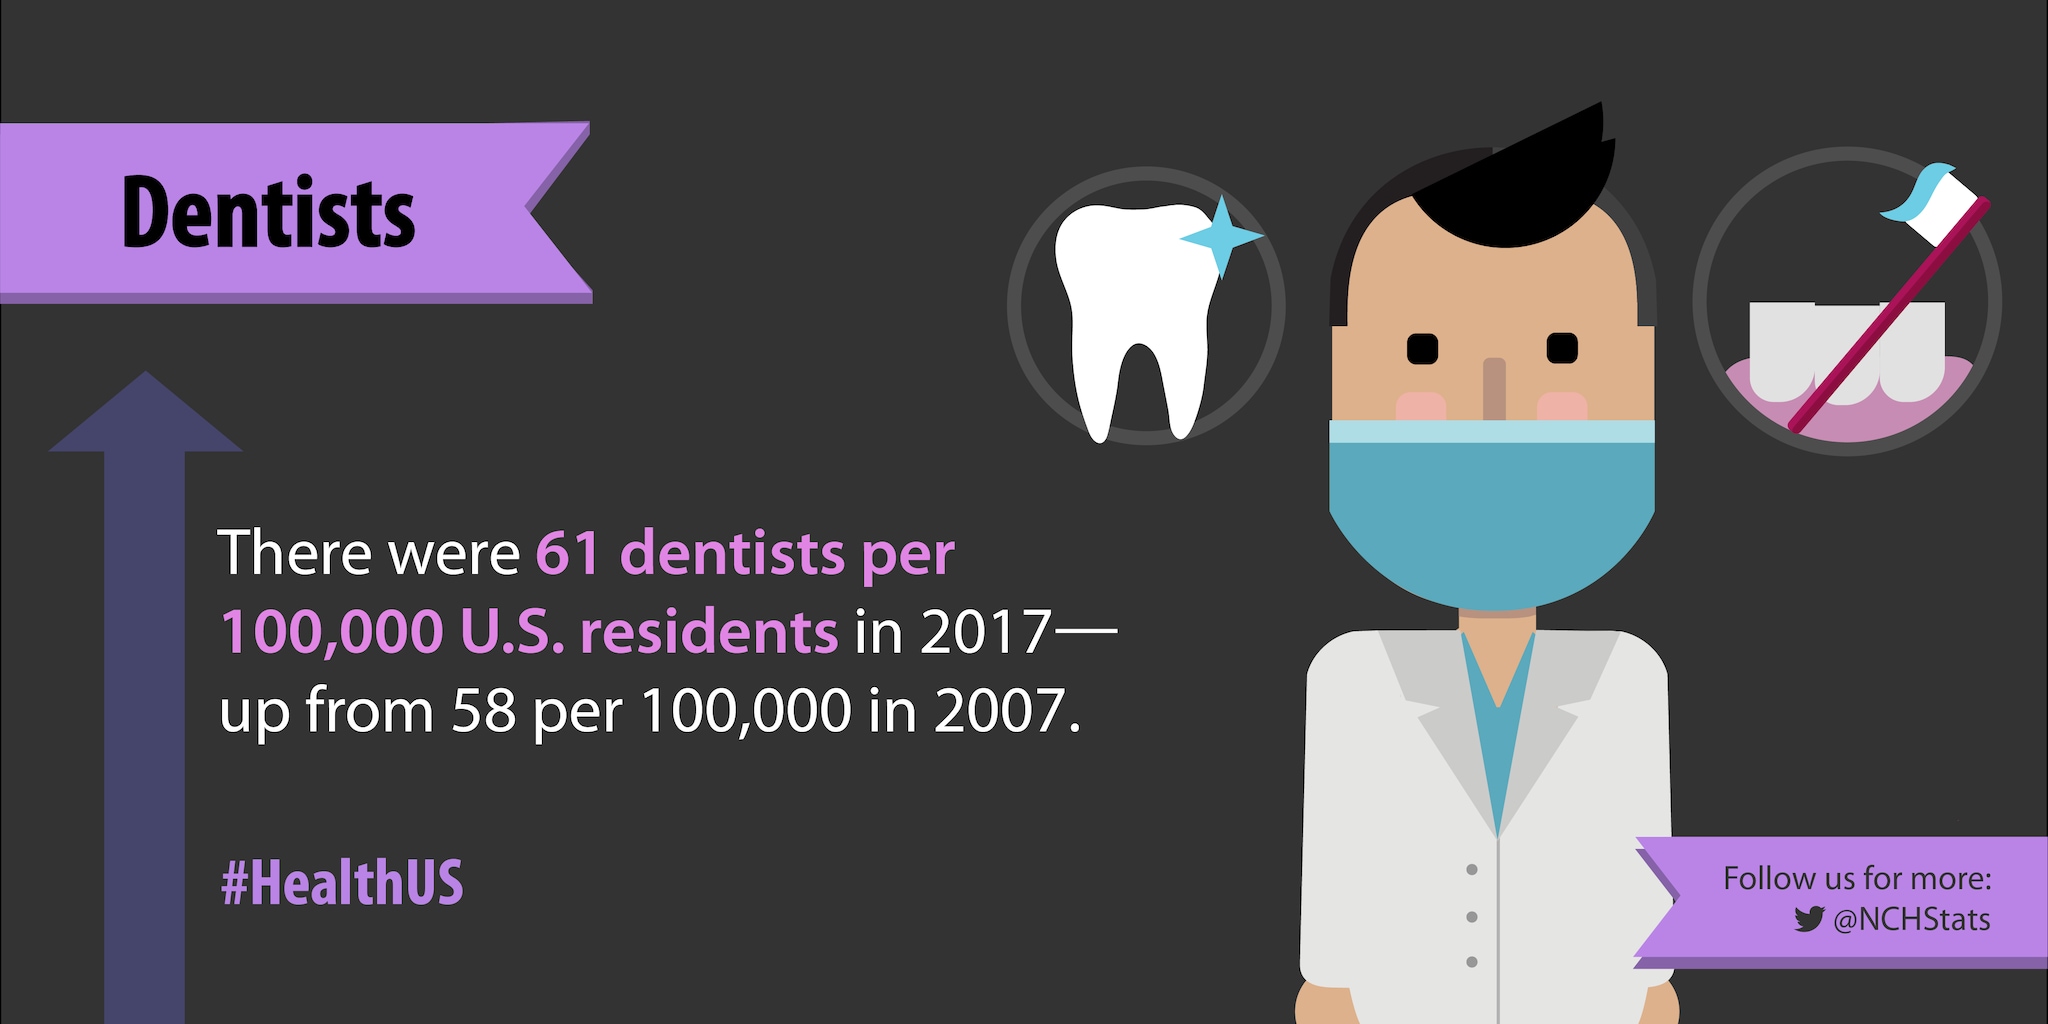 There were 61 dentists per 100,000 U.S. residents in 2017 - up from 58 per 100,000 in 2007.